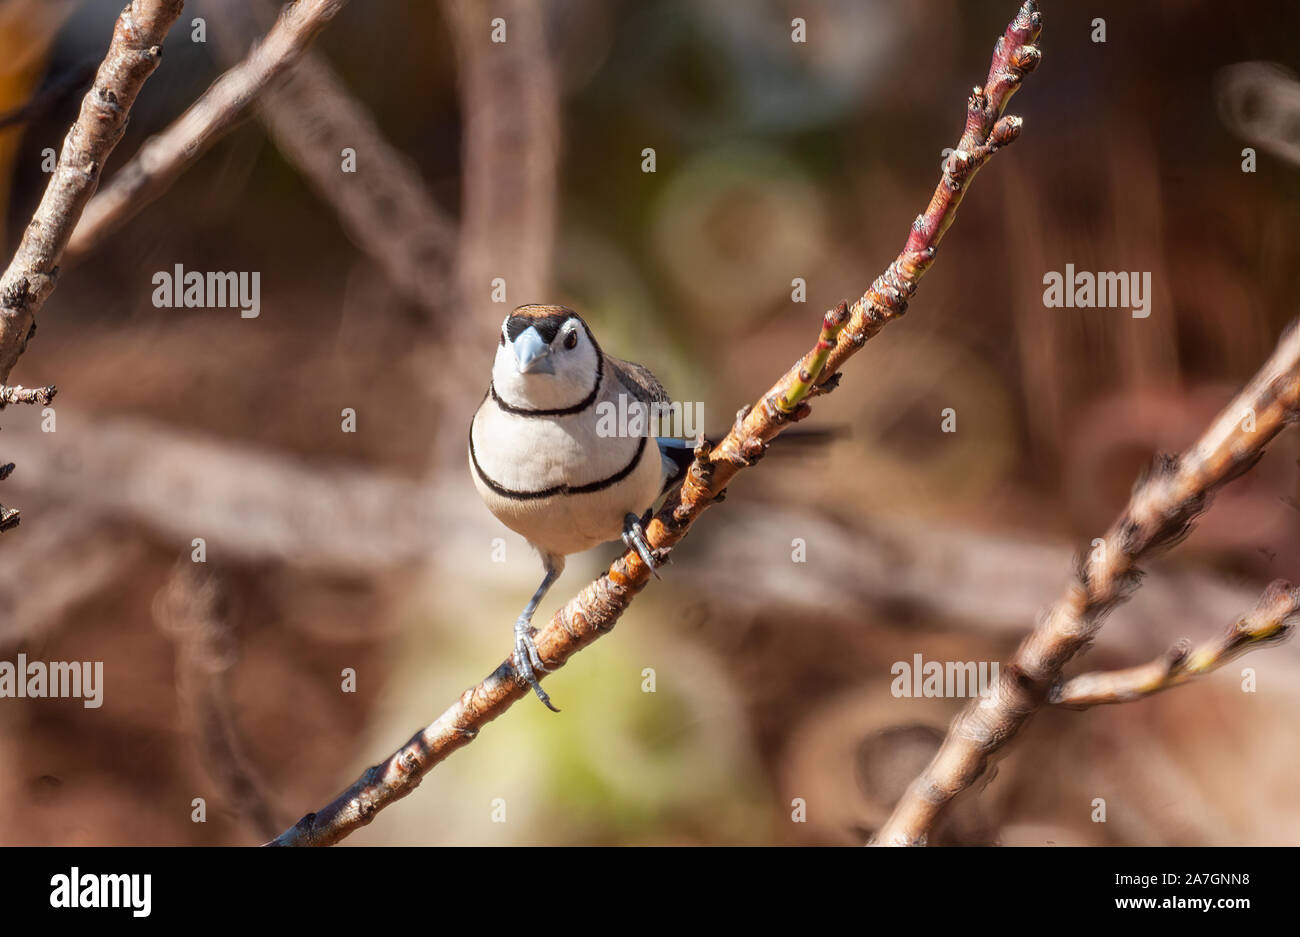 A Double-barred Finch perched on a twig in a garden setting Stock Photo